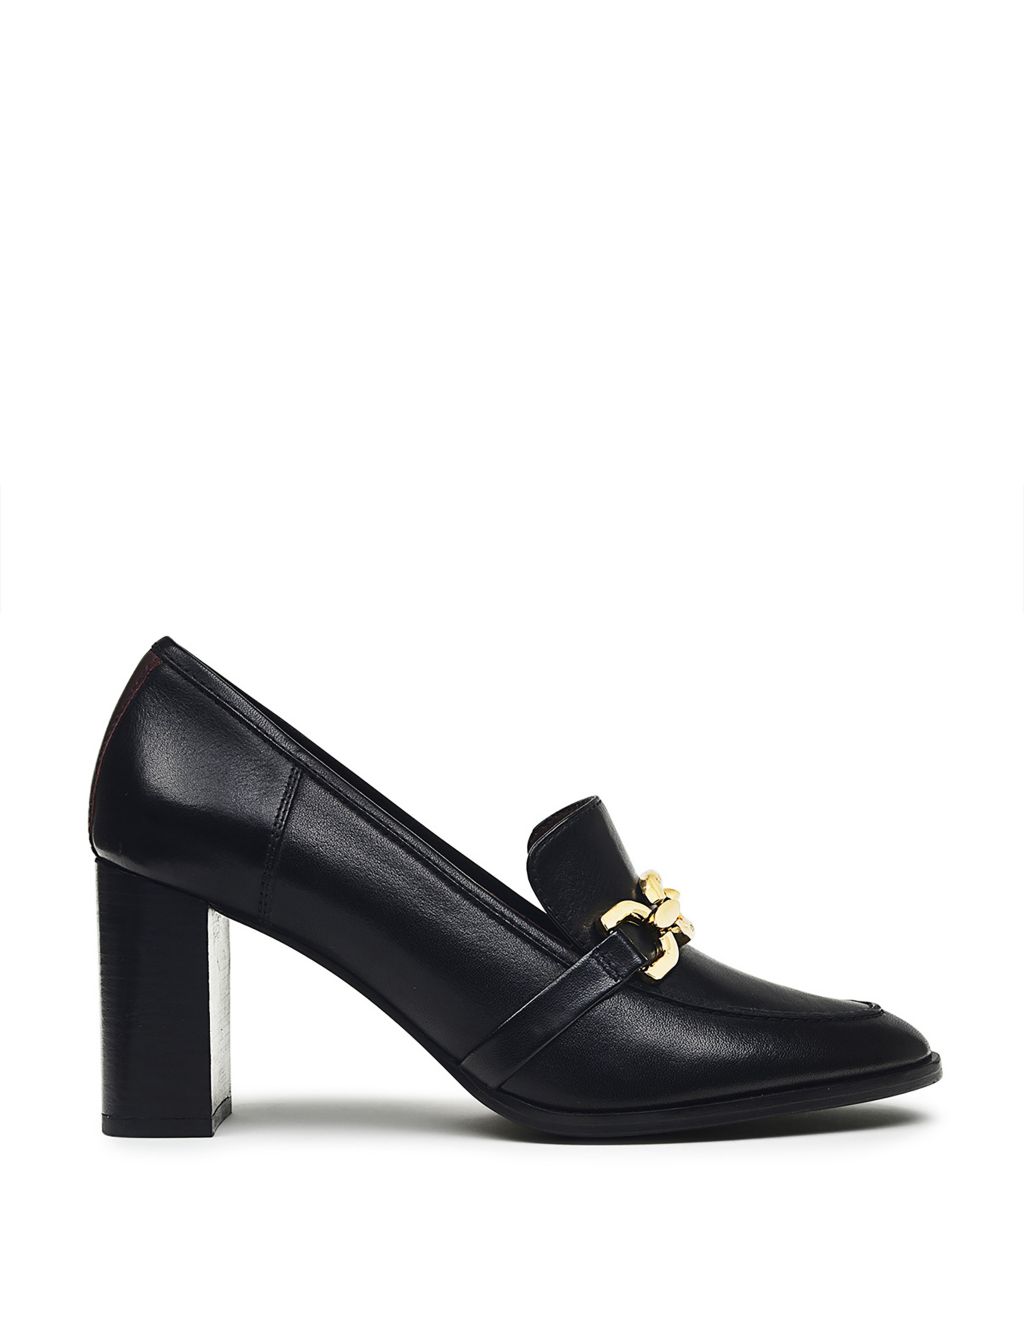 Leather Chunky Block Heel Loafers image 2